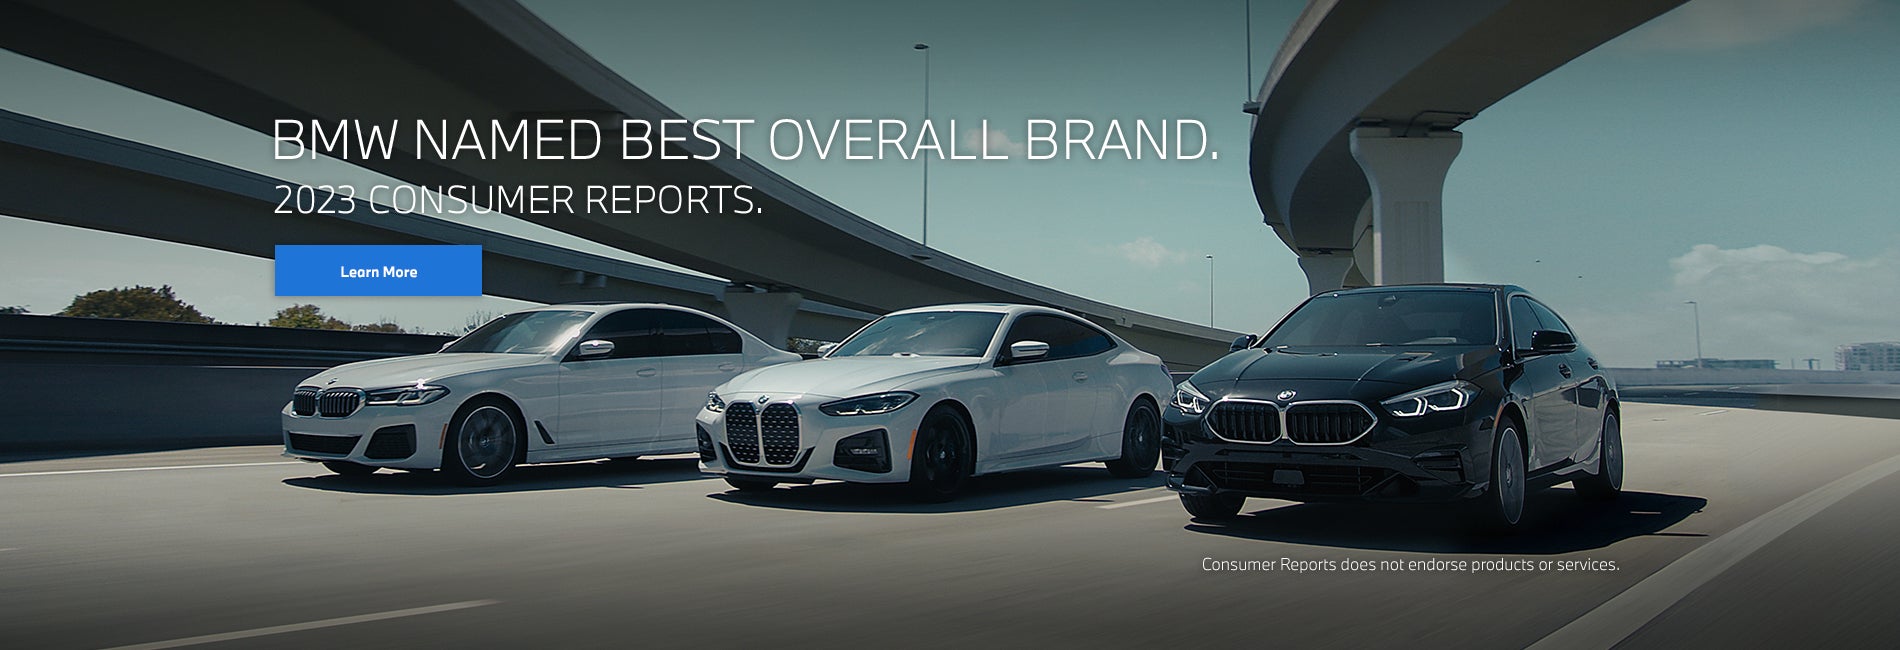 BMW of Bakersfield Named Best Overall Brand by 2023 CR